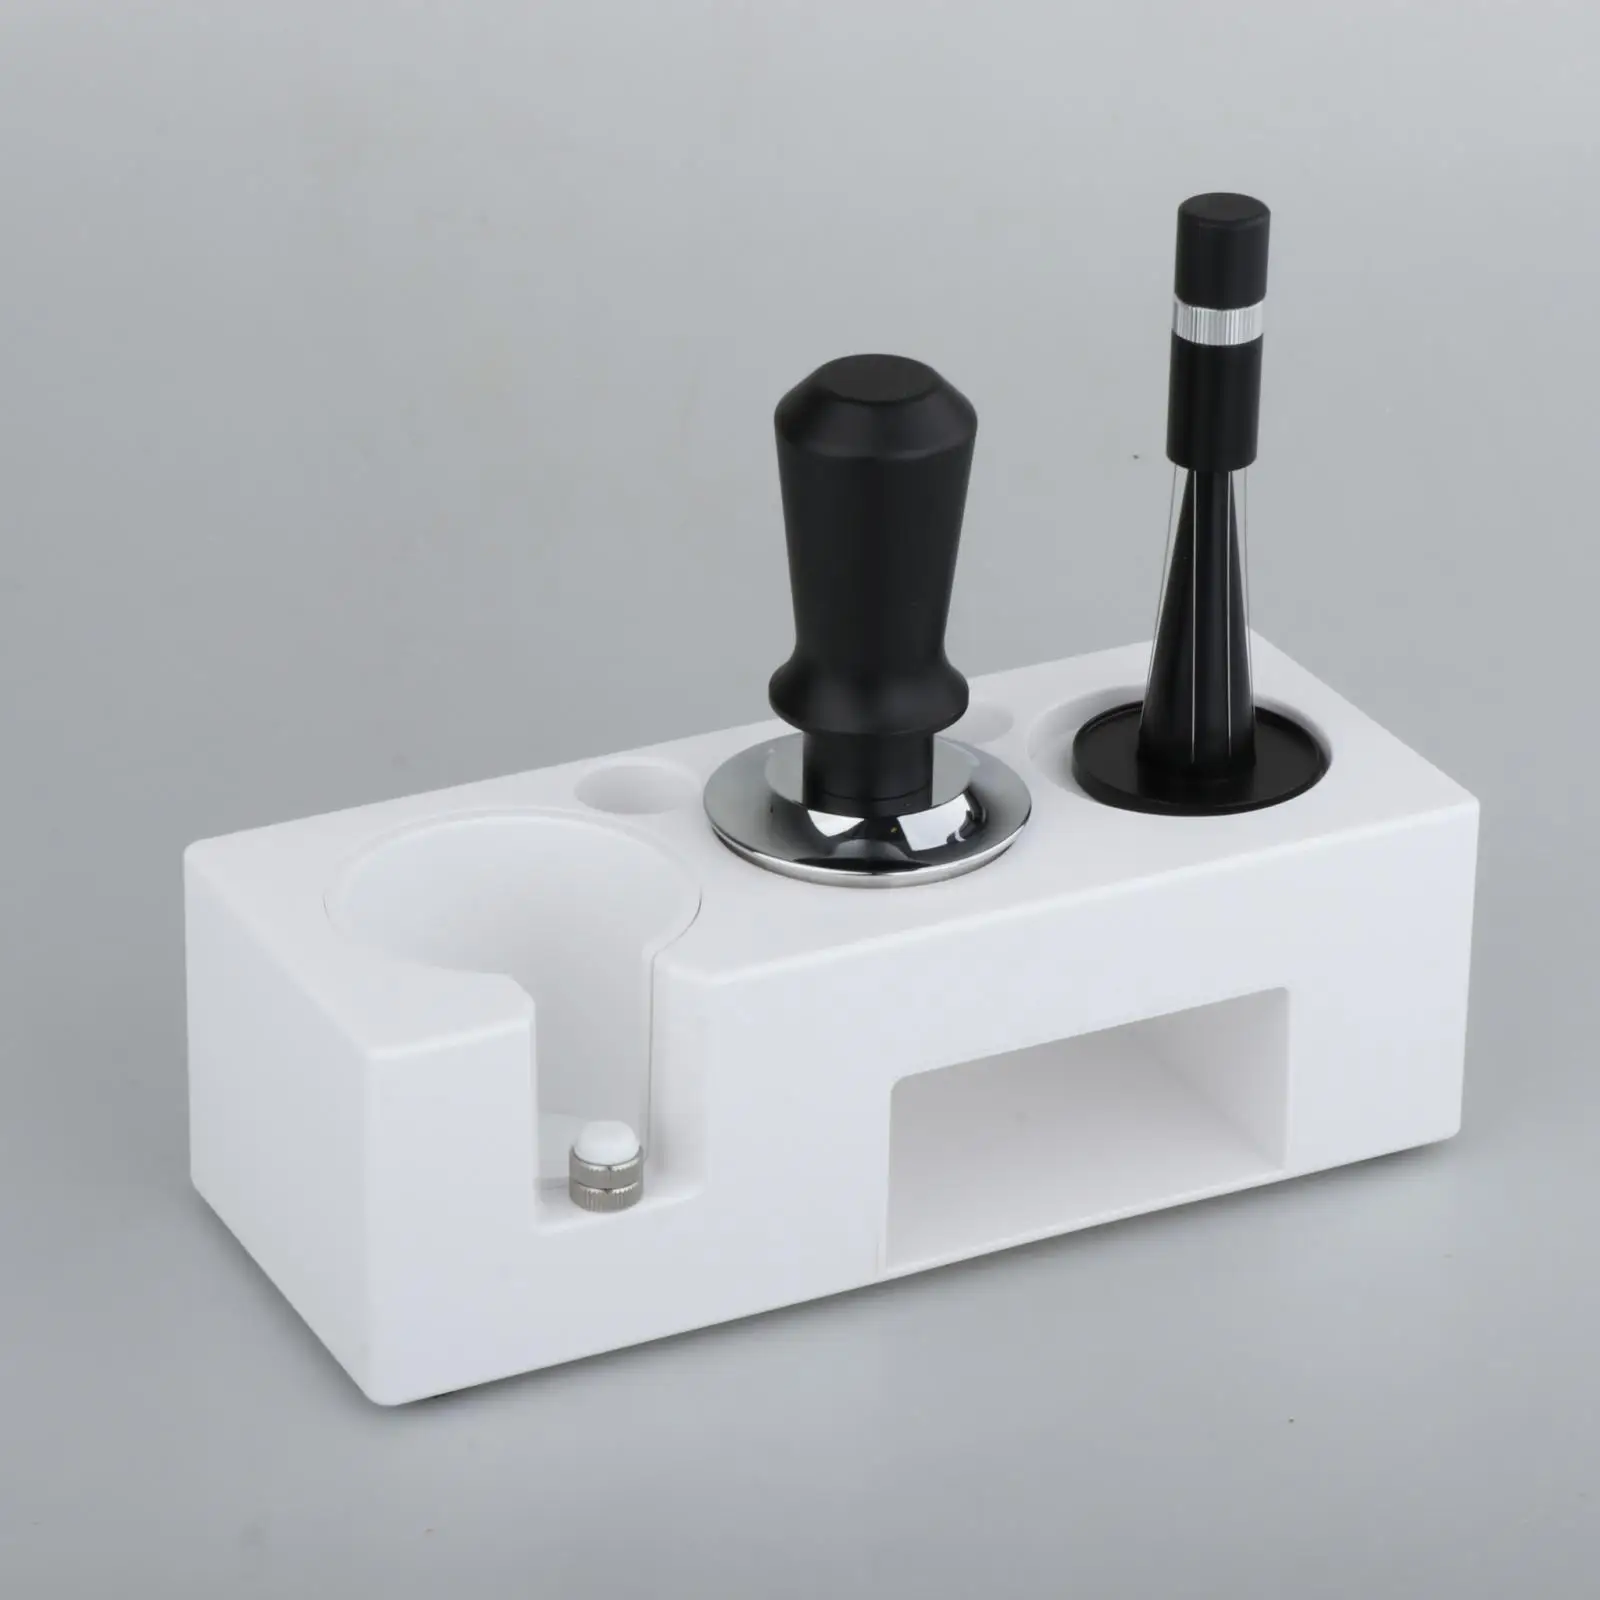 Espresso Tamper Holder Station for Home Kitchen Anti Skid Multifunctional Durable Coffee Tamping Station